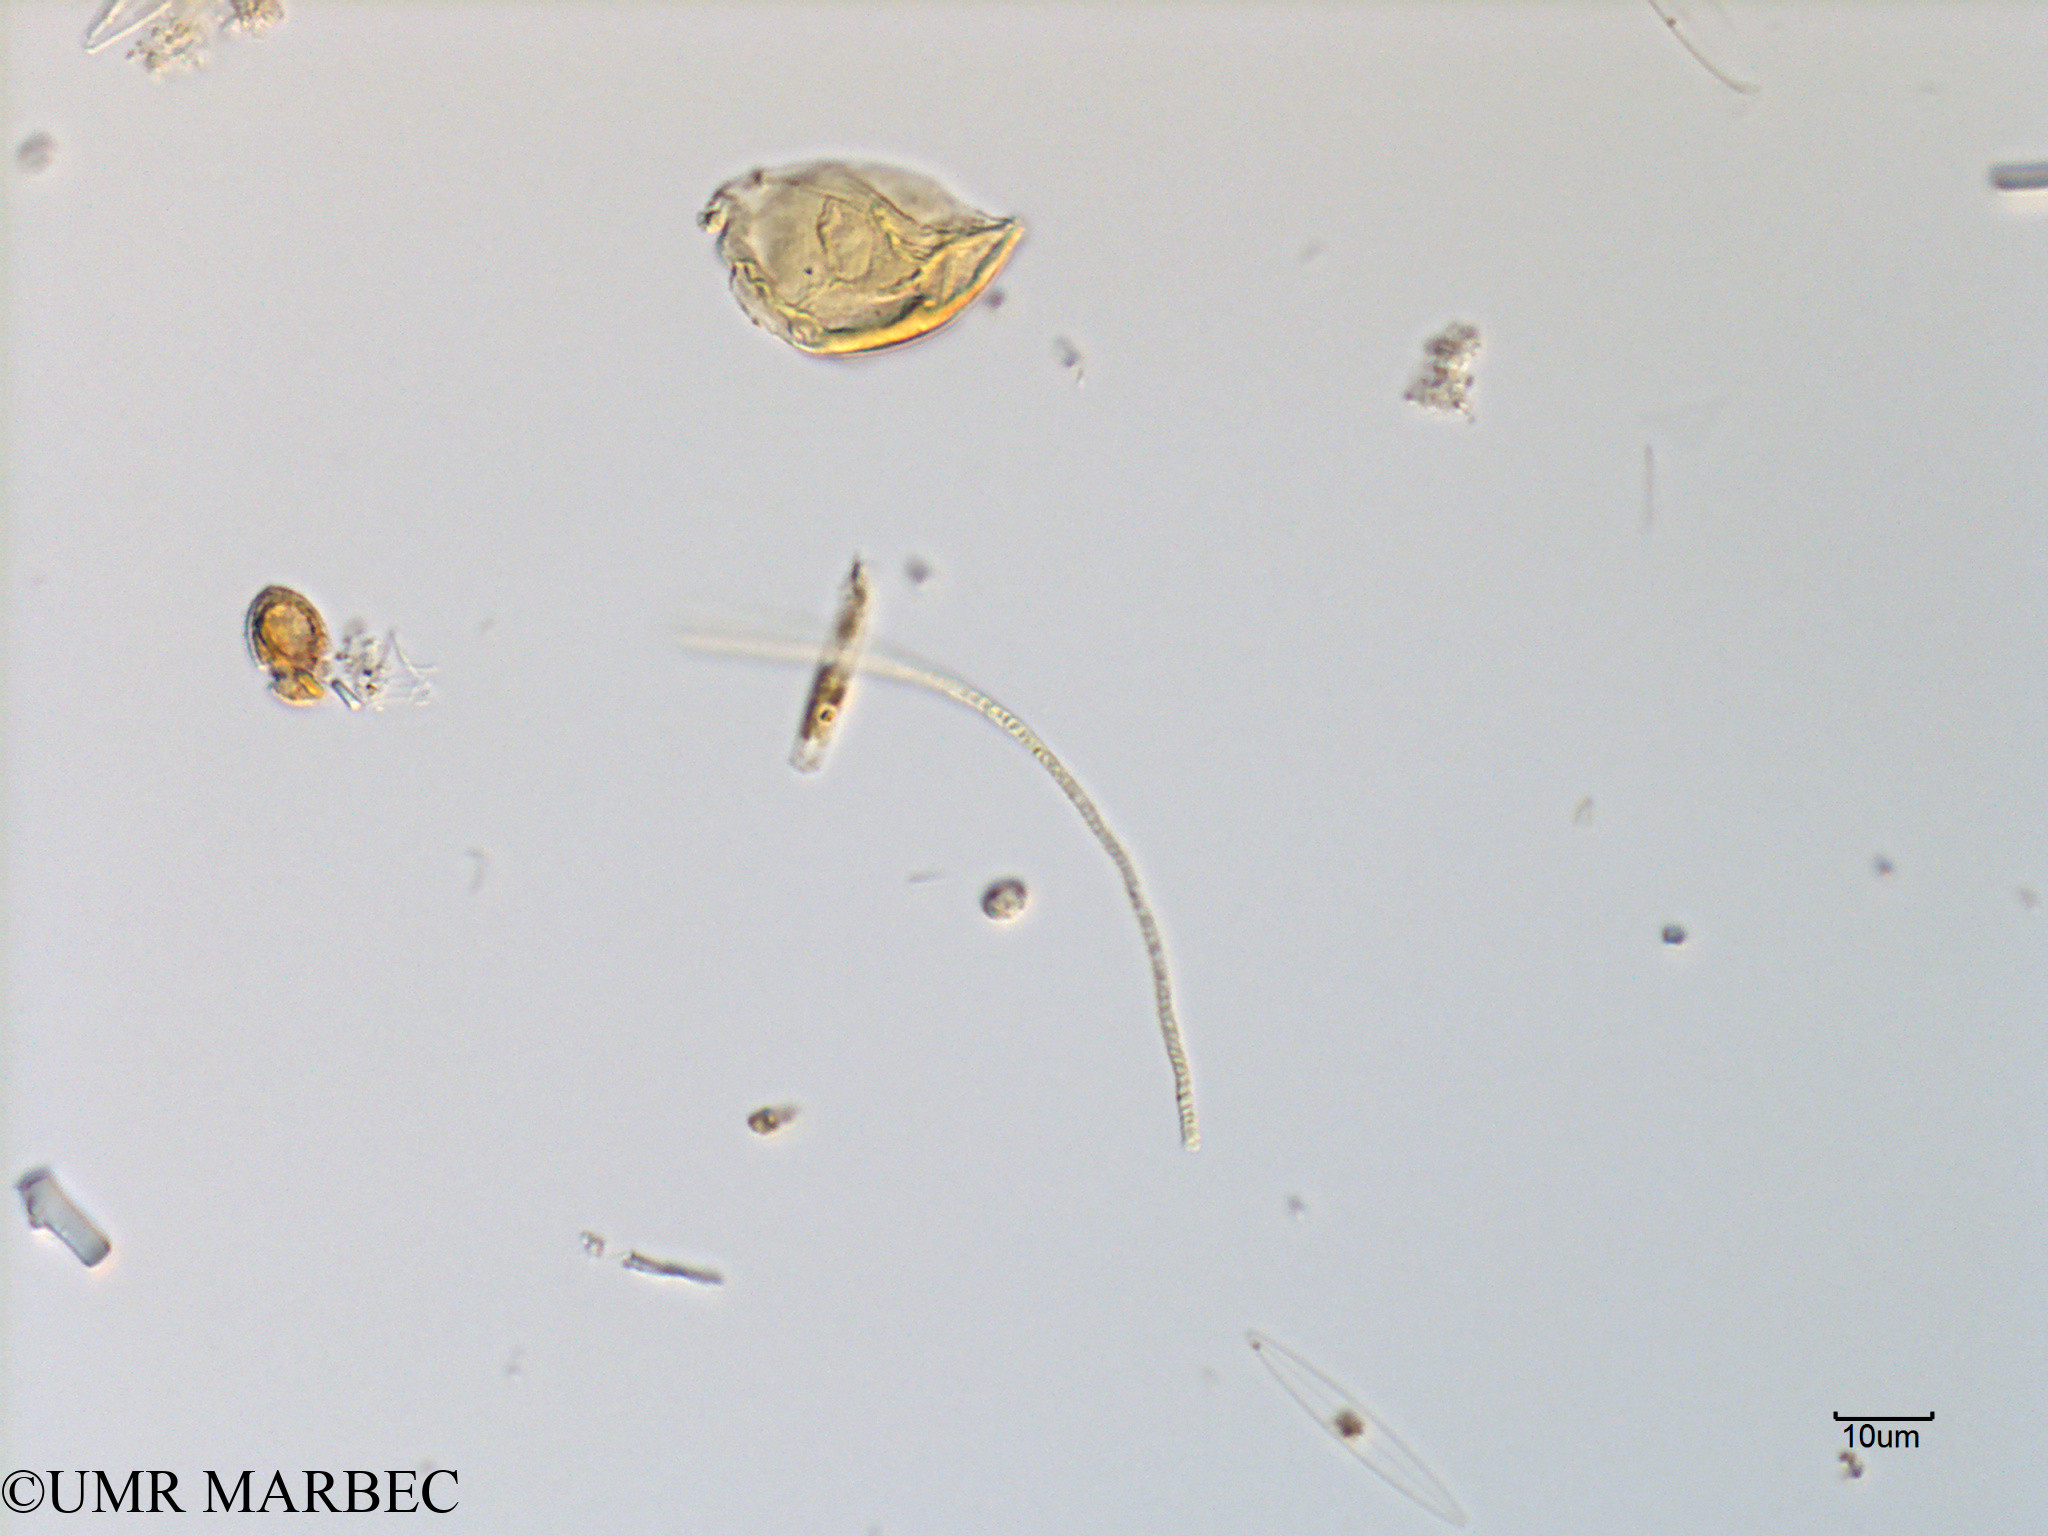 phyto/Scattered_Islands/mayotte_lagoon/SIREME May 2016/Oscillatoriale spp (MAY11_cyano-1).tif(copy).jpg